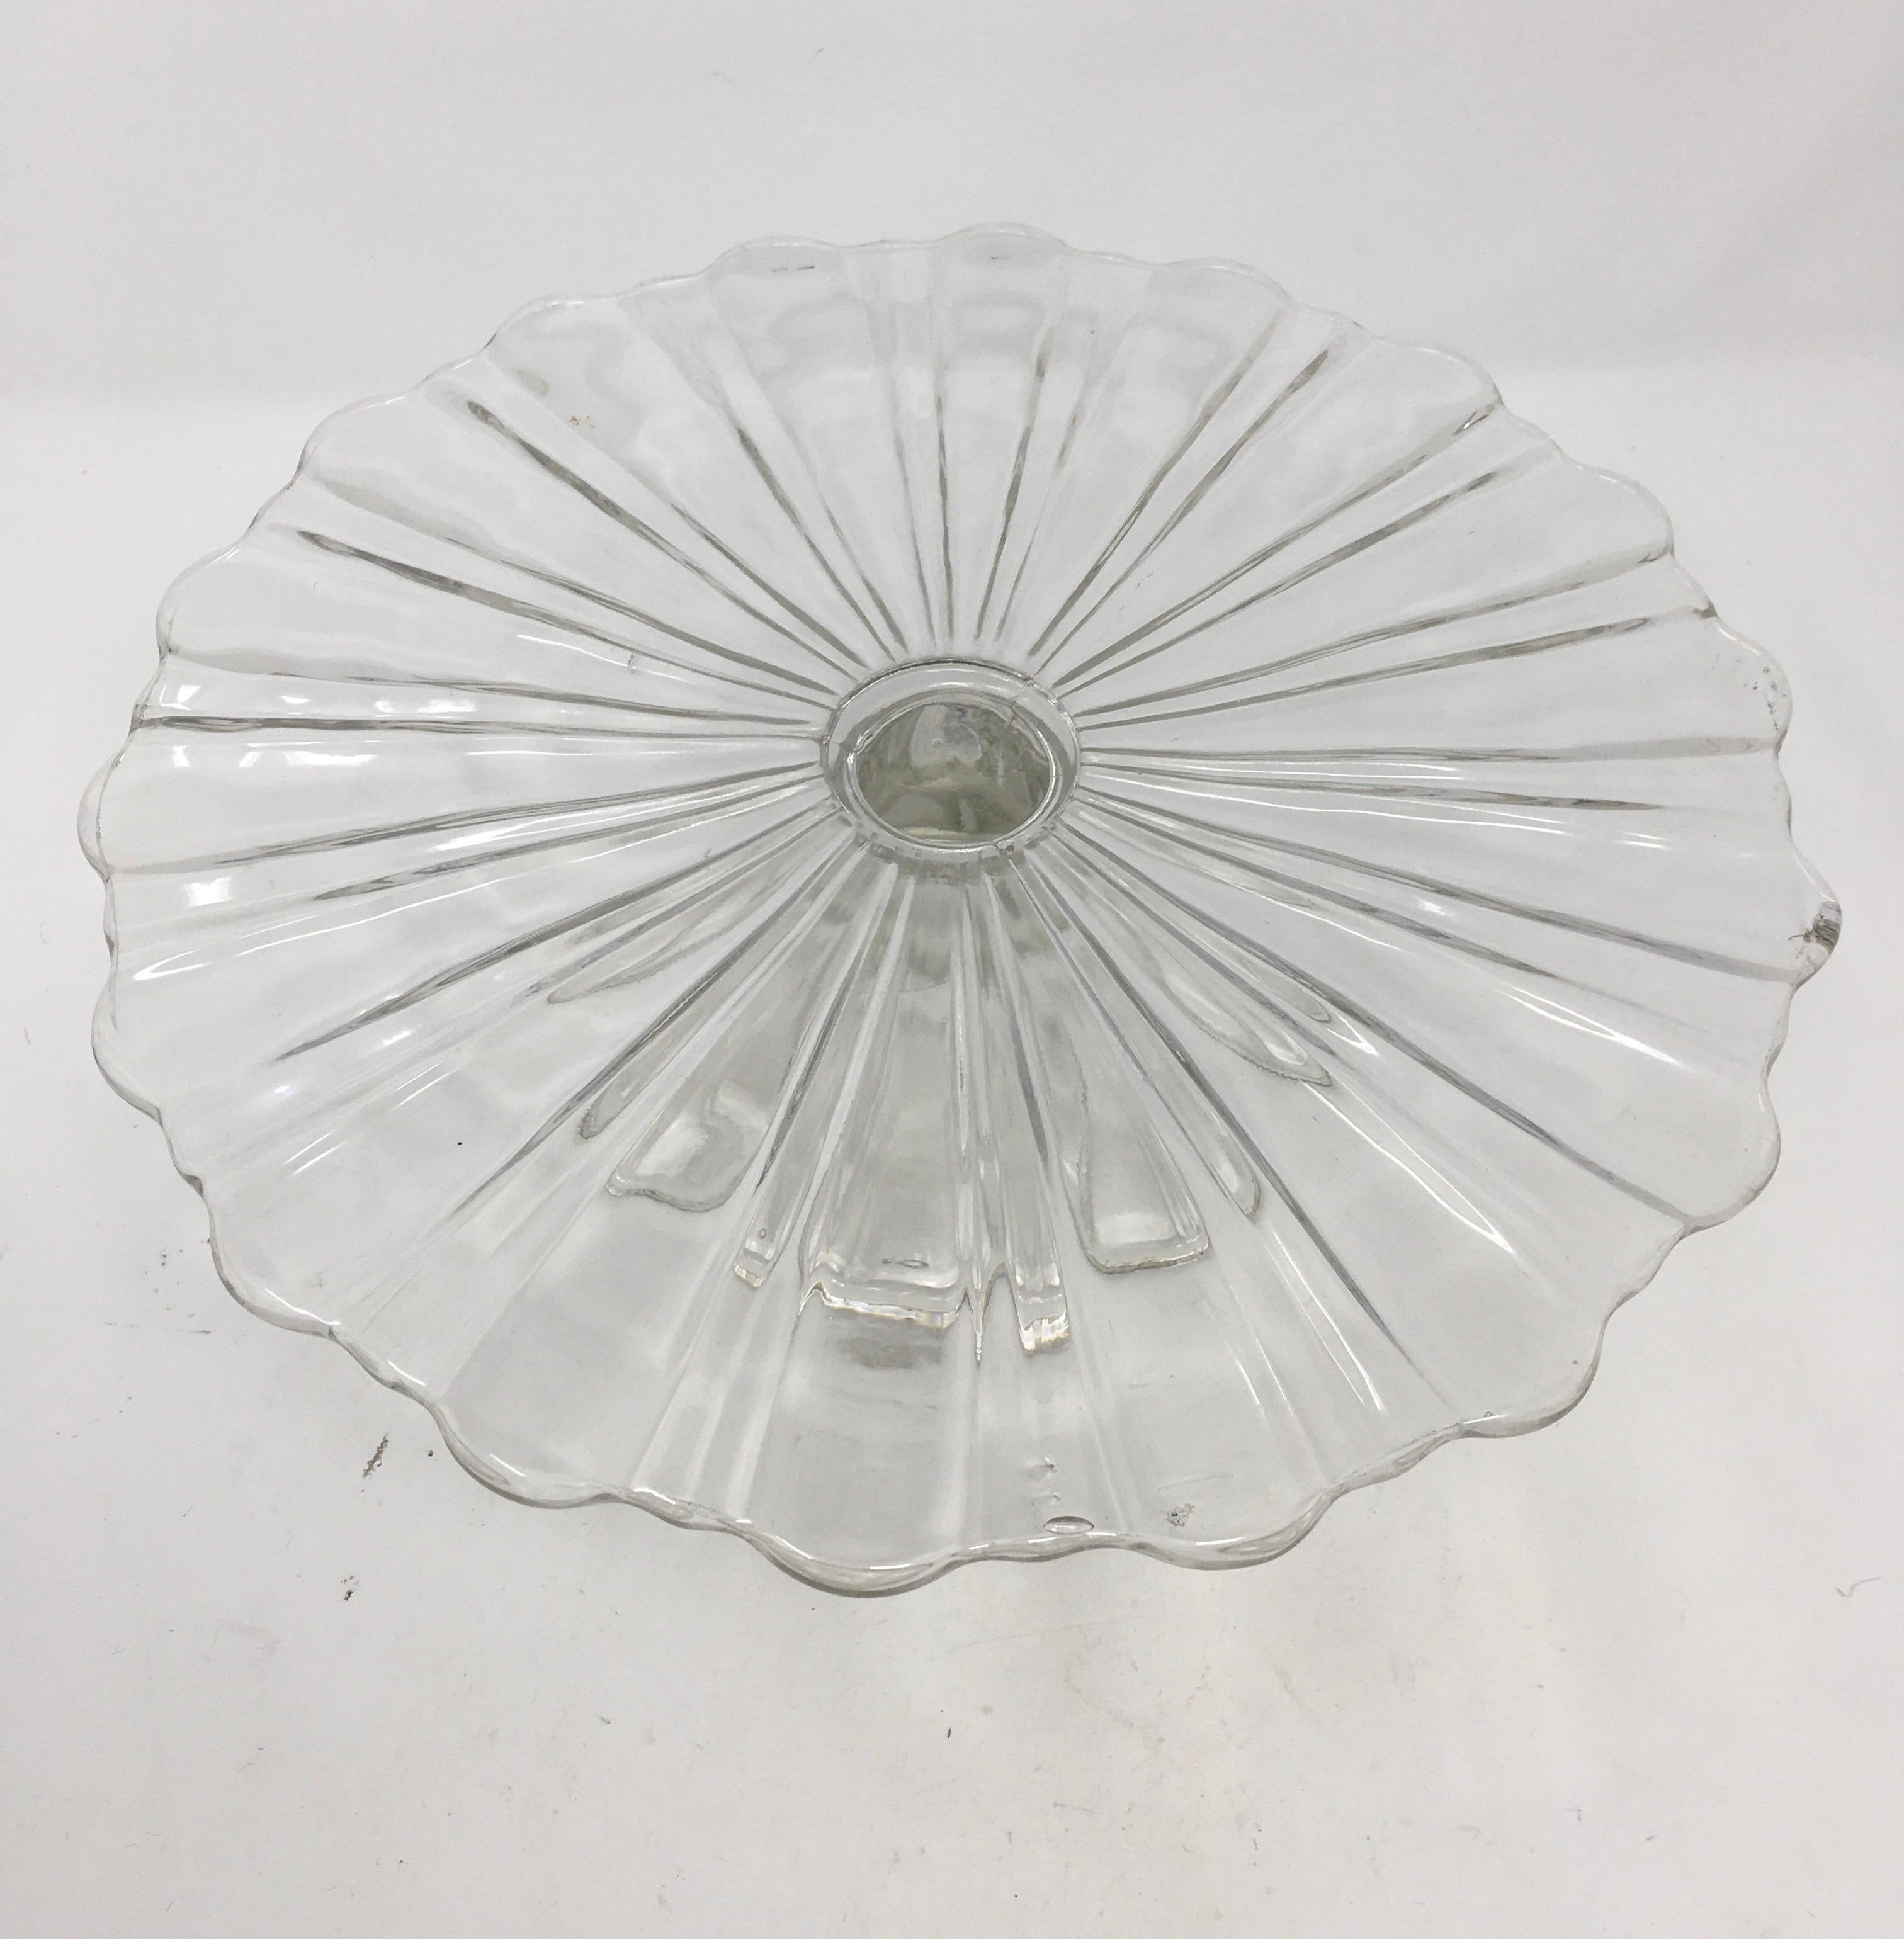 This antique cut glass cake patisserie stand sits on a cut glass pedestal base. Perfect for displaying your culinary confections, this piece’s simple, elegant look will mix with any decor.